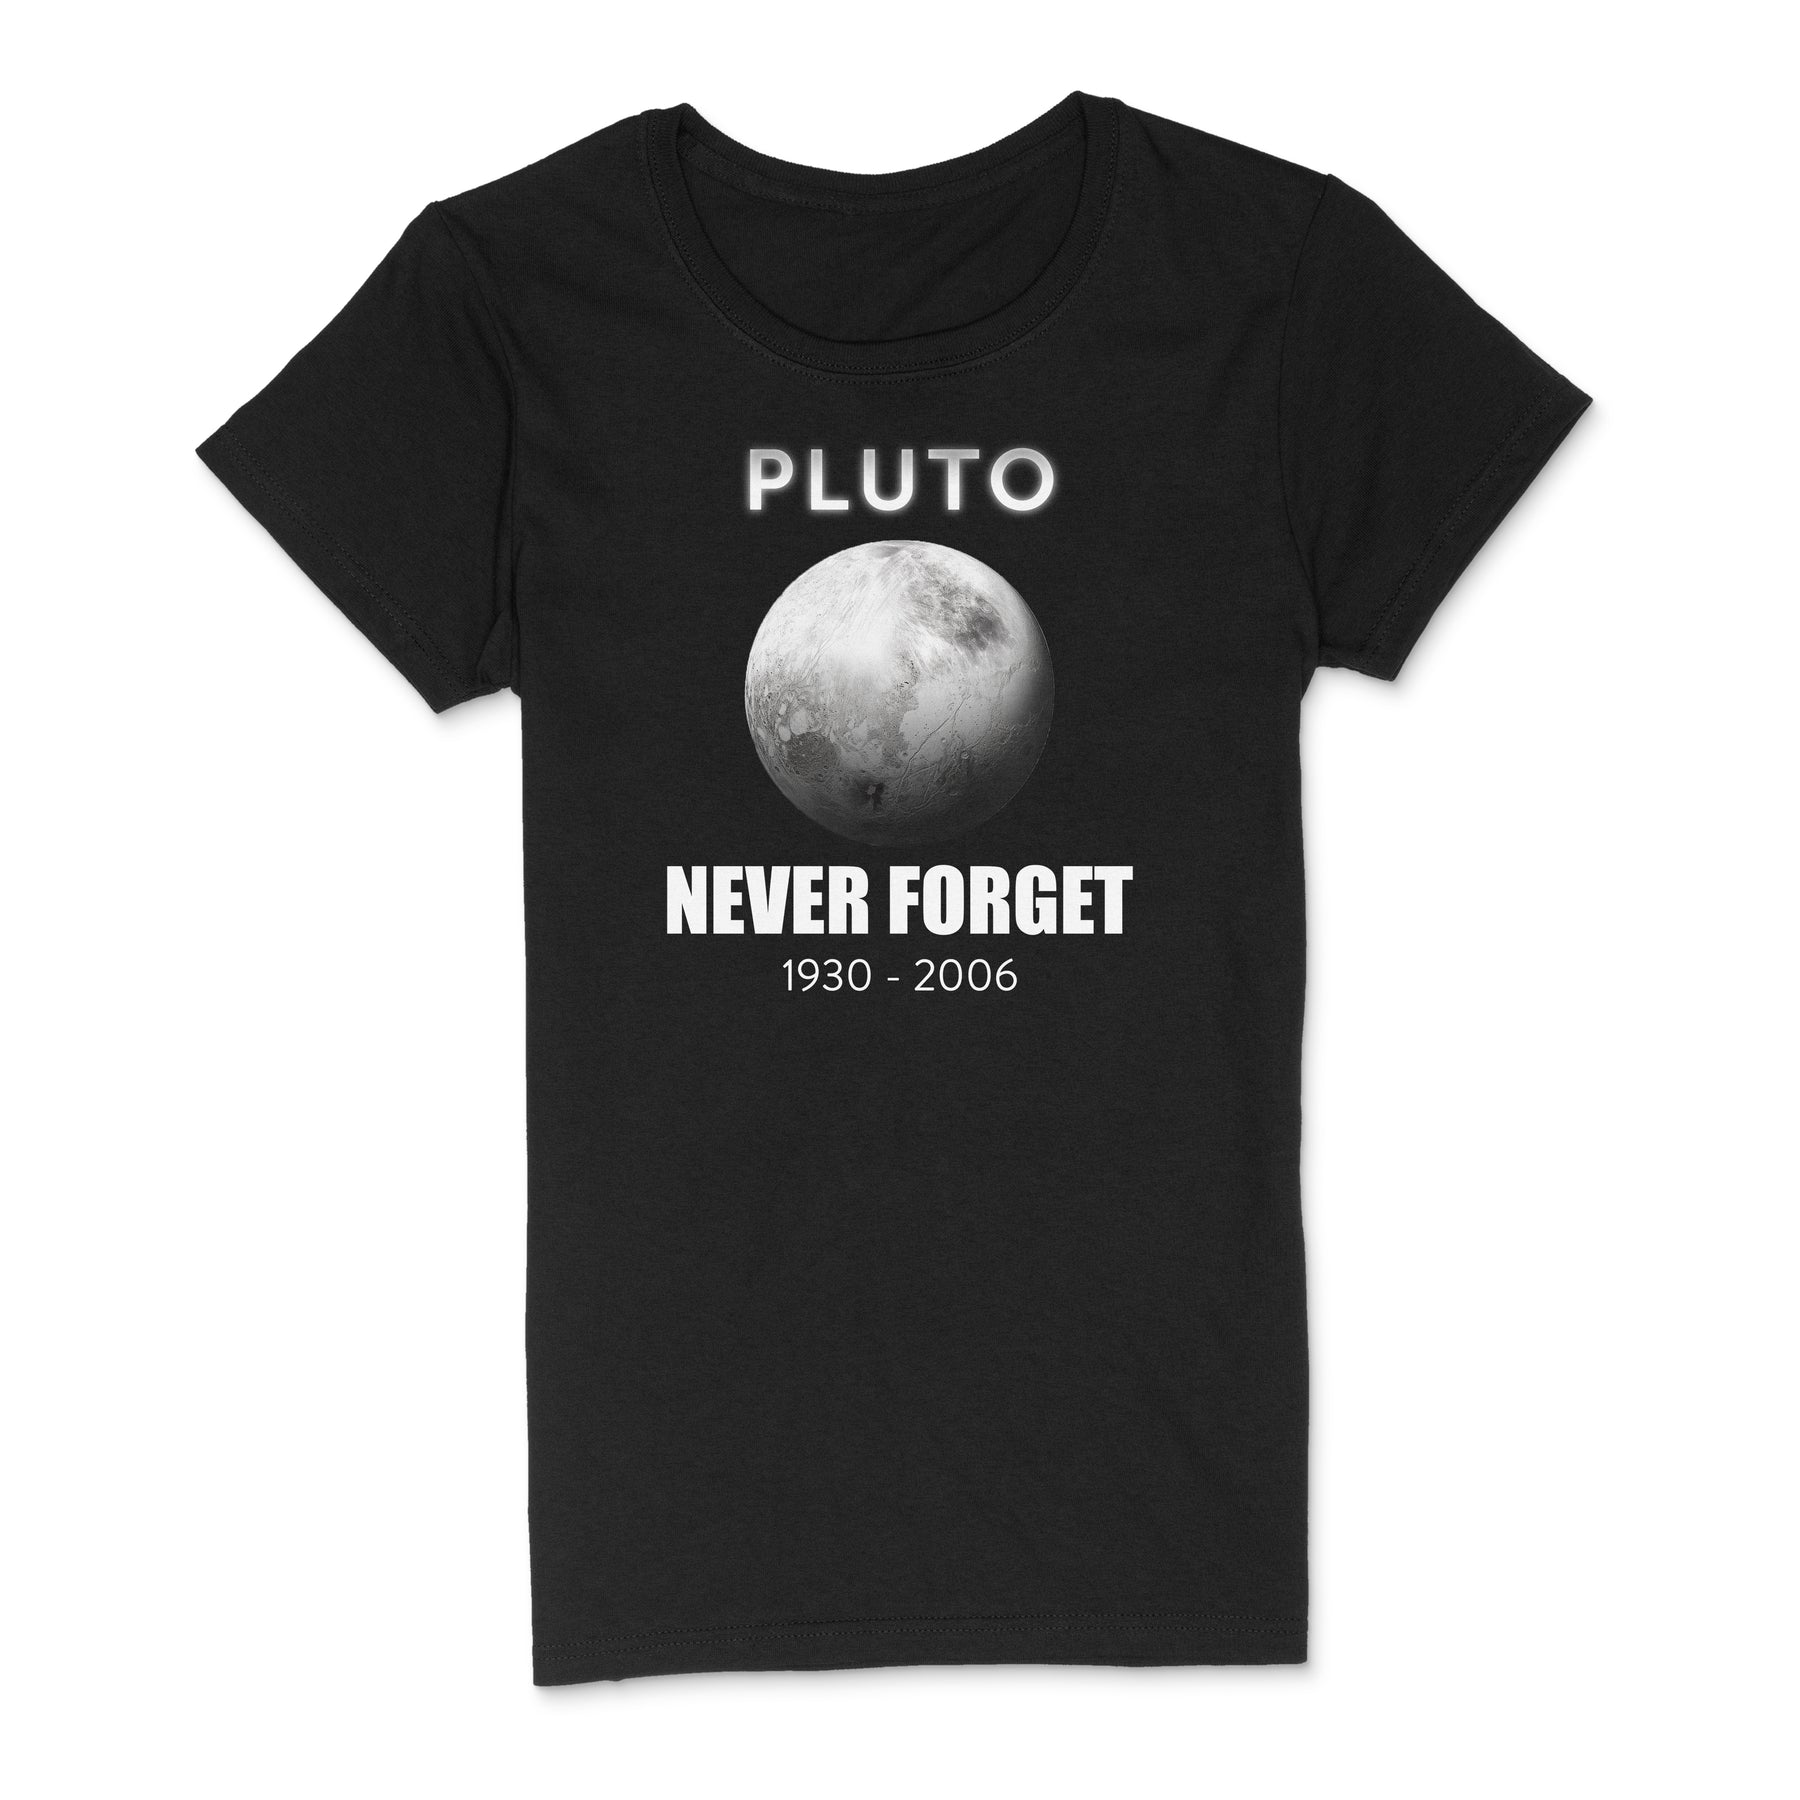 "Pluto, Never Forget " Premium Midweight Ringspun Cotton T-Shirt - Mens/Womens Fits